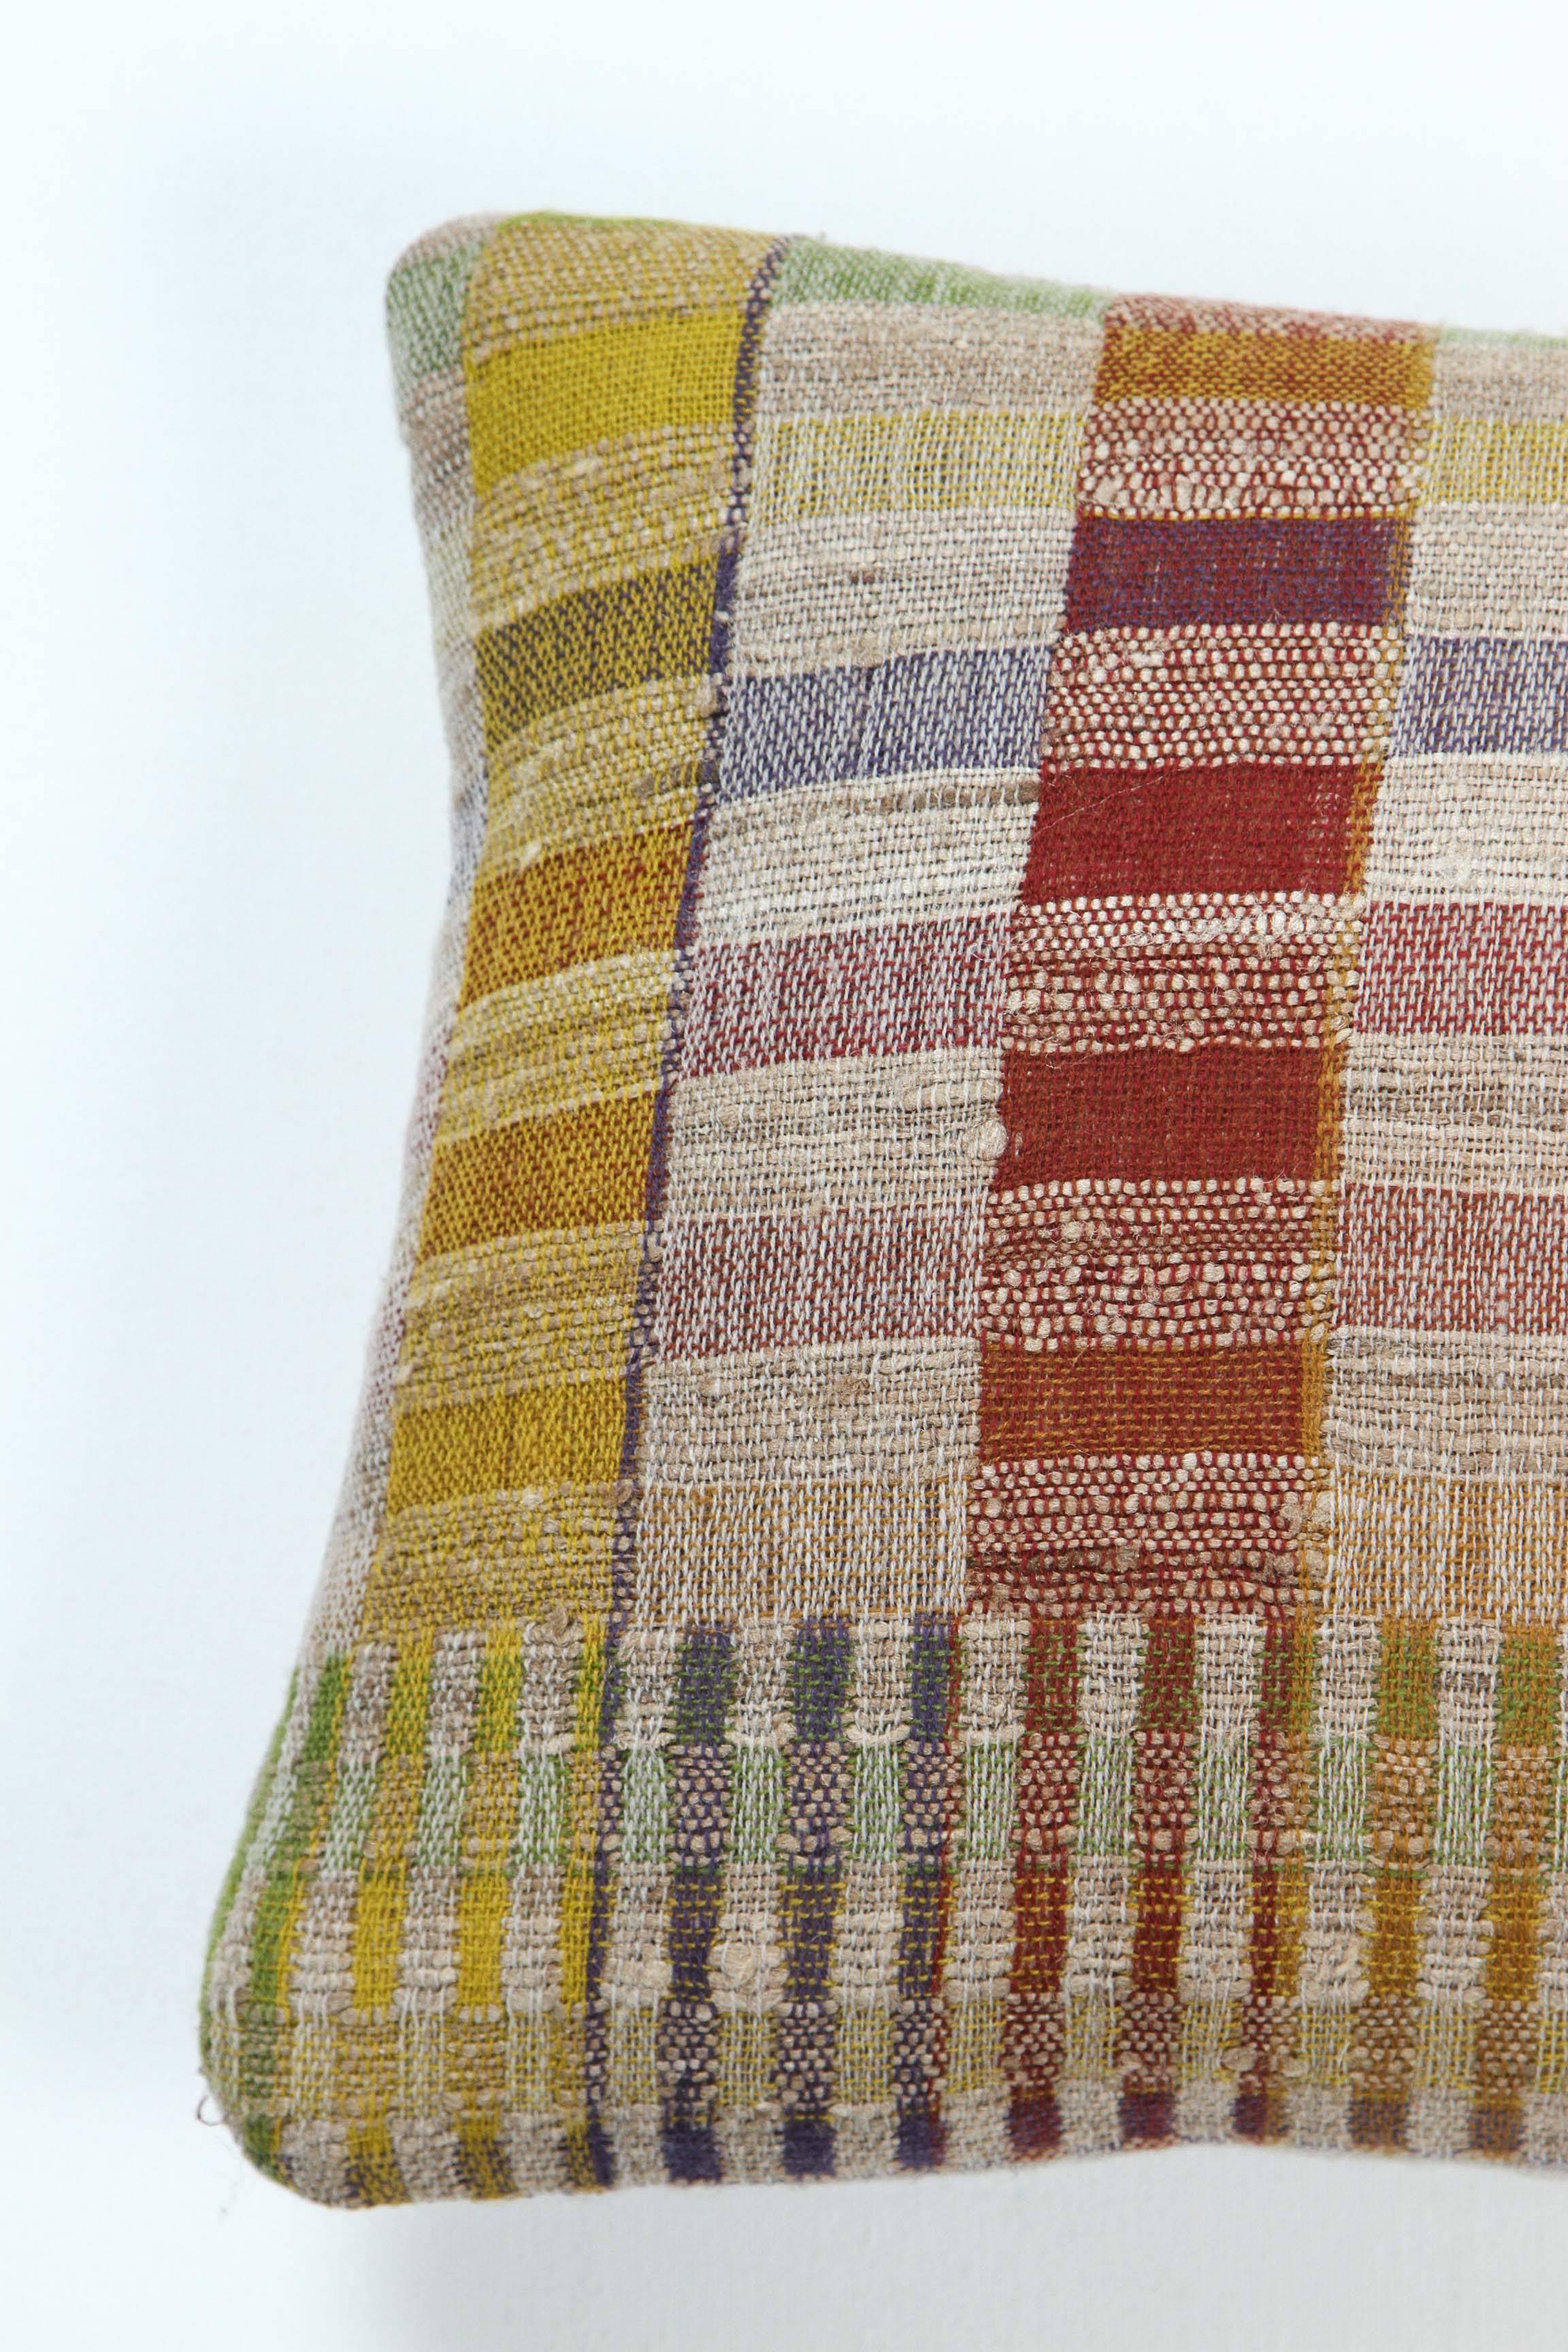 A contemporary line of cushions, pillows, throws, bedcovers, bedspreads and yardage handwoven in India on antique jacquard looms. Handspun wool, cotton, linen and raw silk give the textiles an appealing uneven quality.

This wool and raw tussar